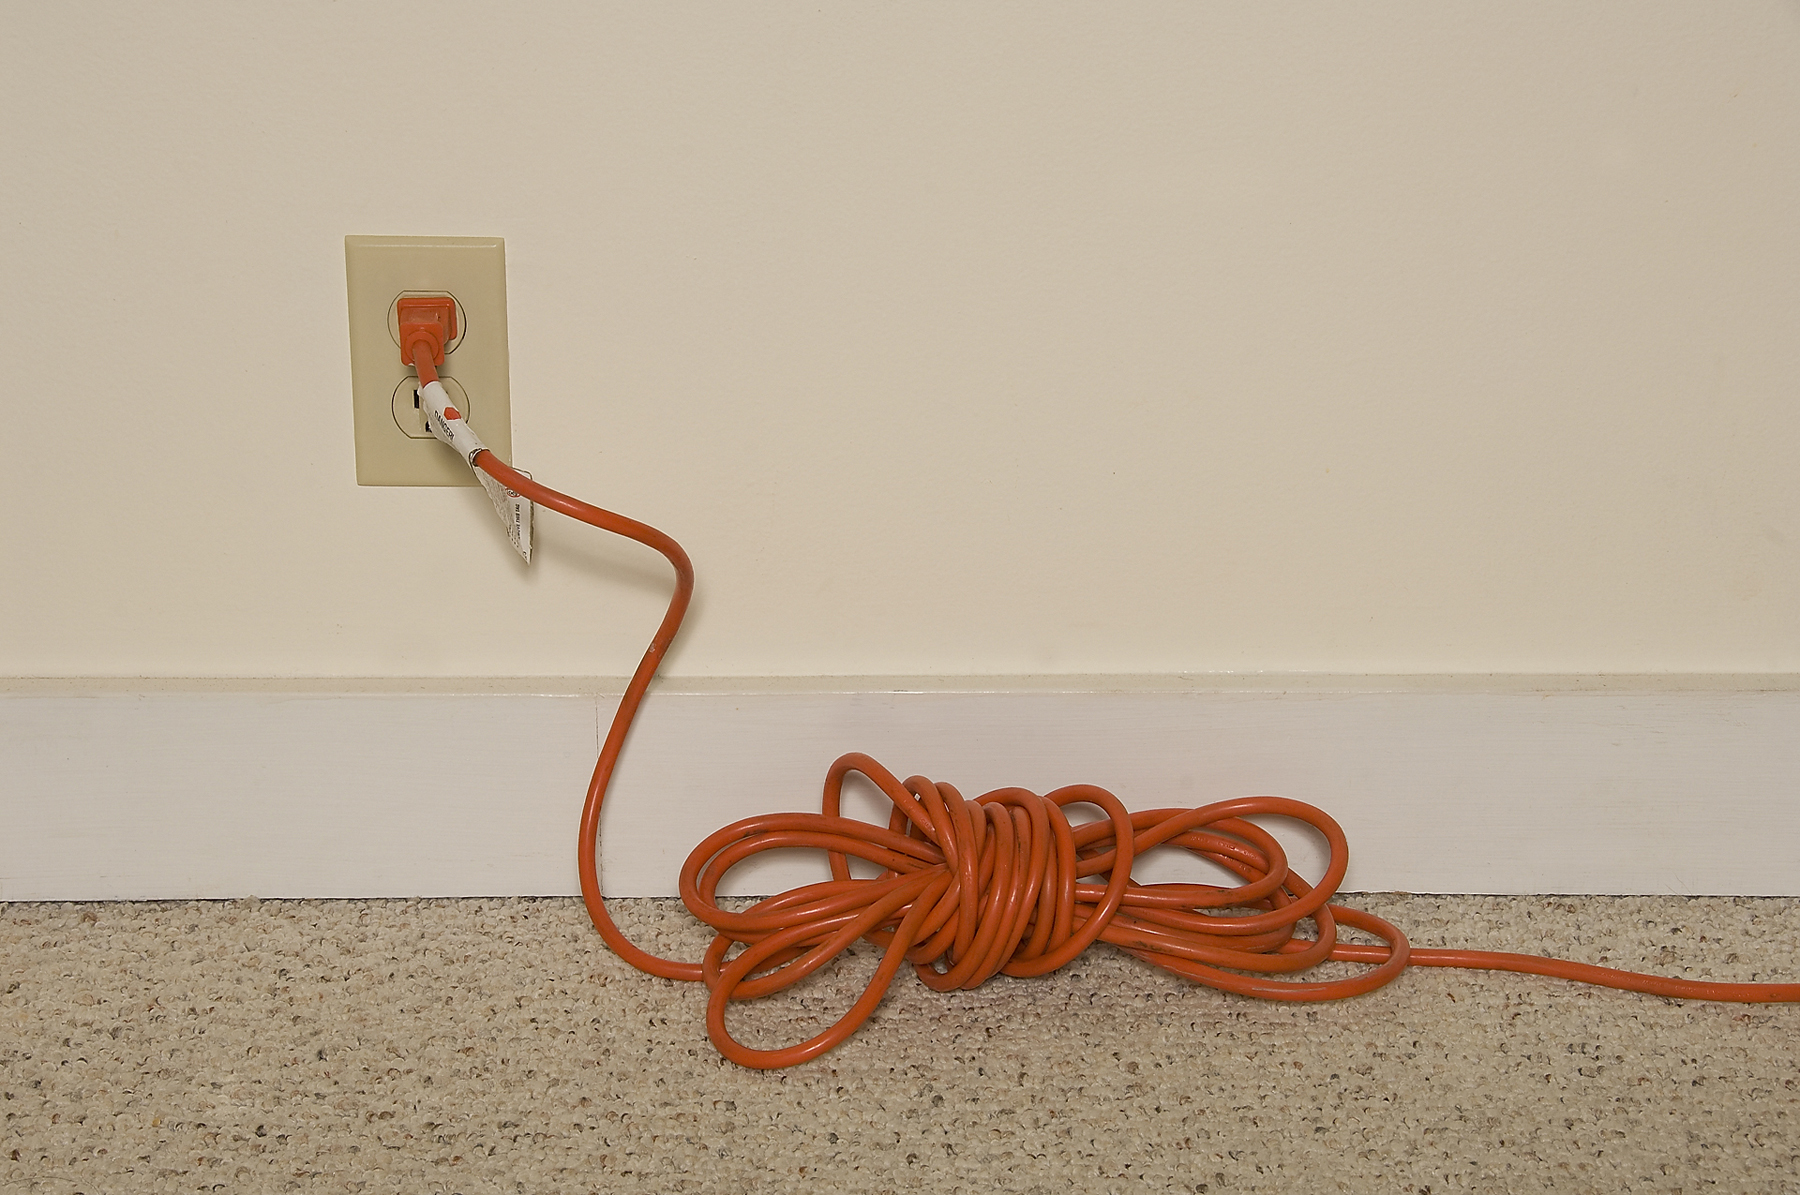 What You Need To Know About Extension Cord Safety |